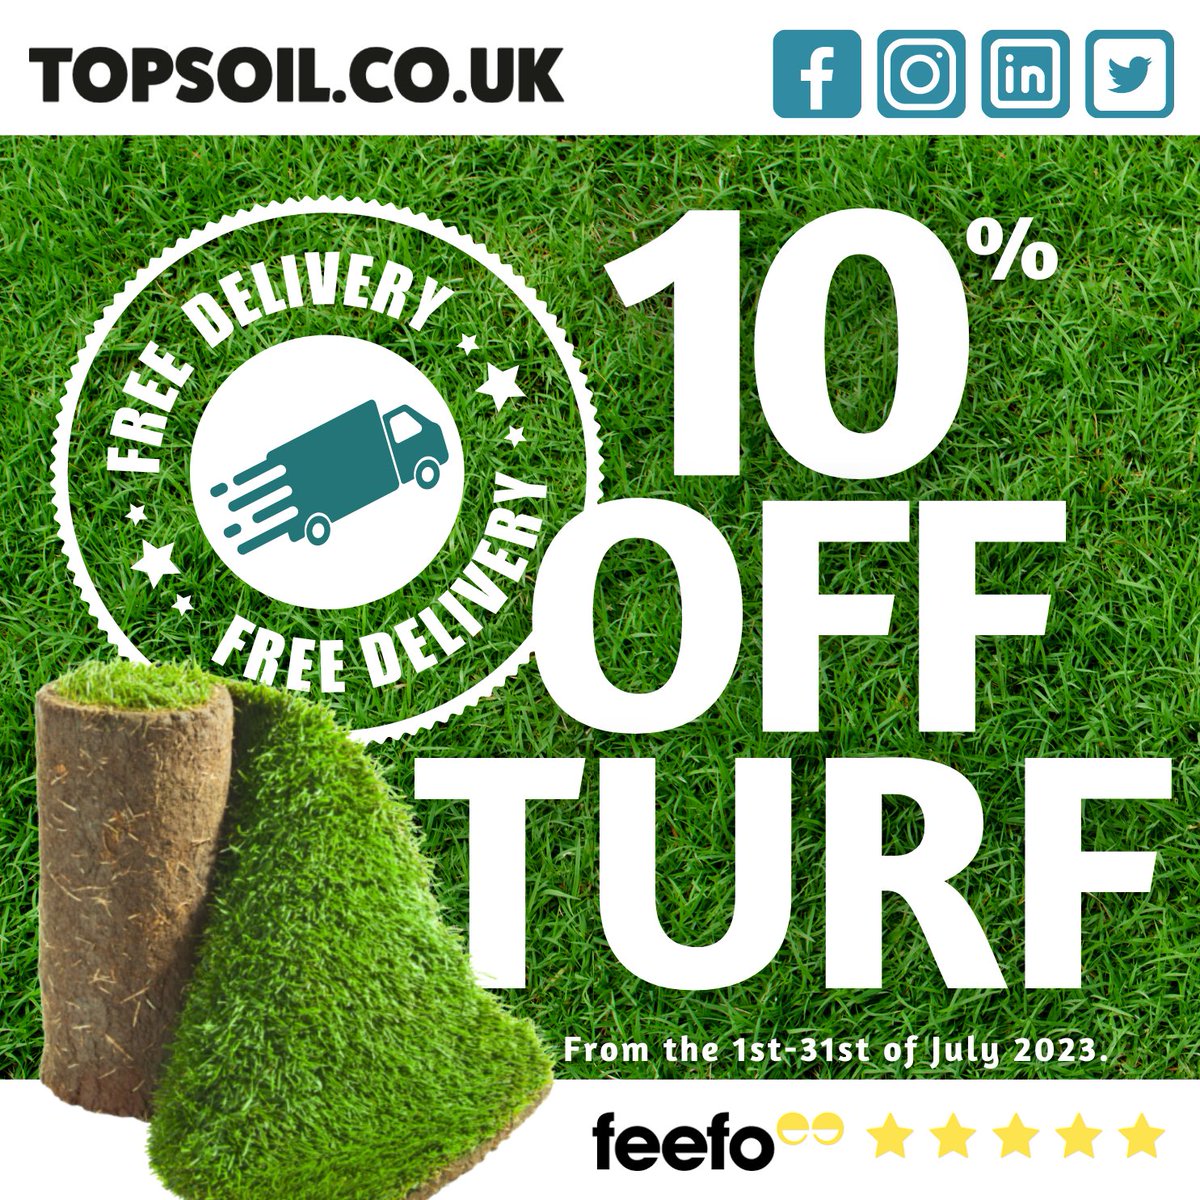 ⭐ LIMITED TIME OFFER ⭐ DON'T MISS OUT! ⭐

Give your garden a revamp for less this #summer, with 10% off our quality turf throughout July! 🏡🌱

To order, simply visit our website: hubs.ly/Q01WFdC70

#gardenrevam #gardenproject #gardenrenovation #turf #topsoil #bark